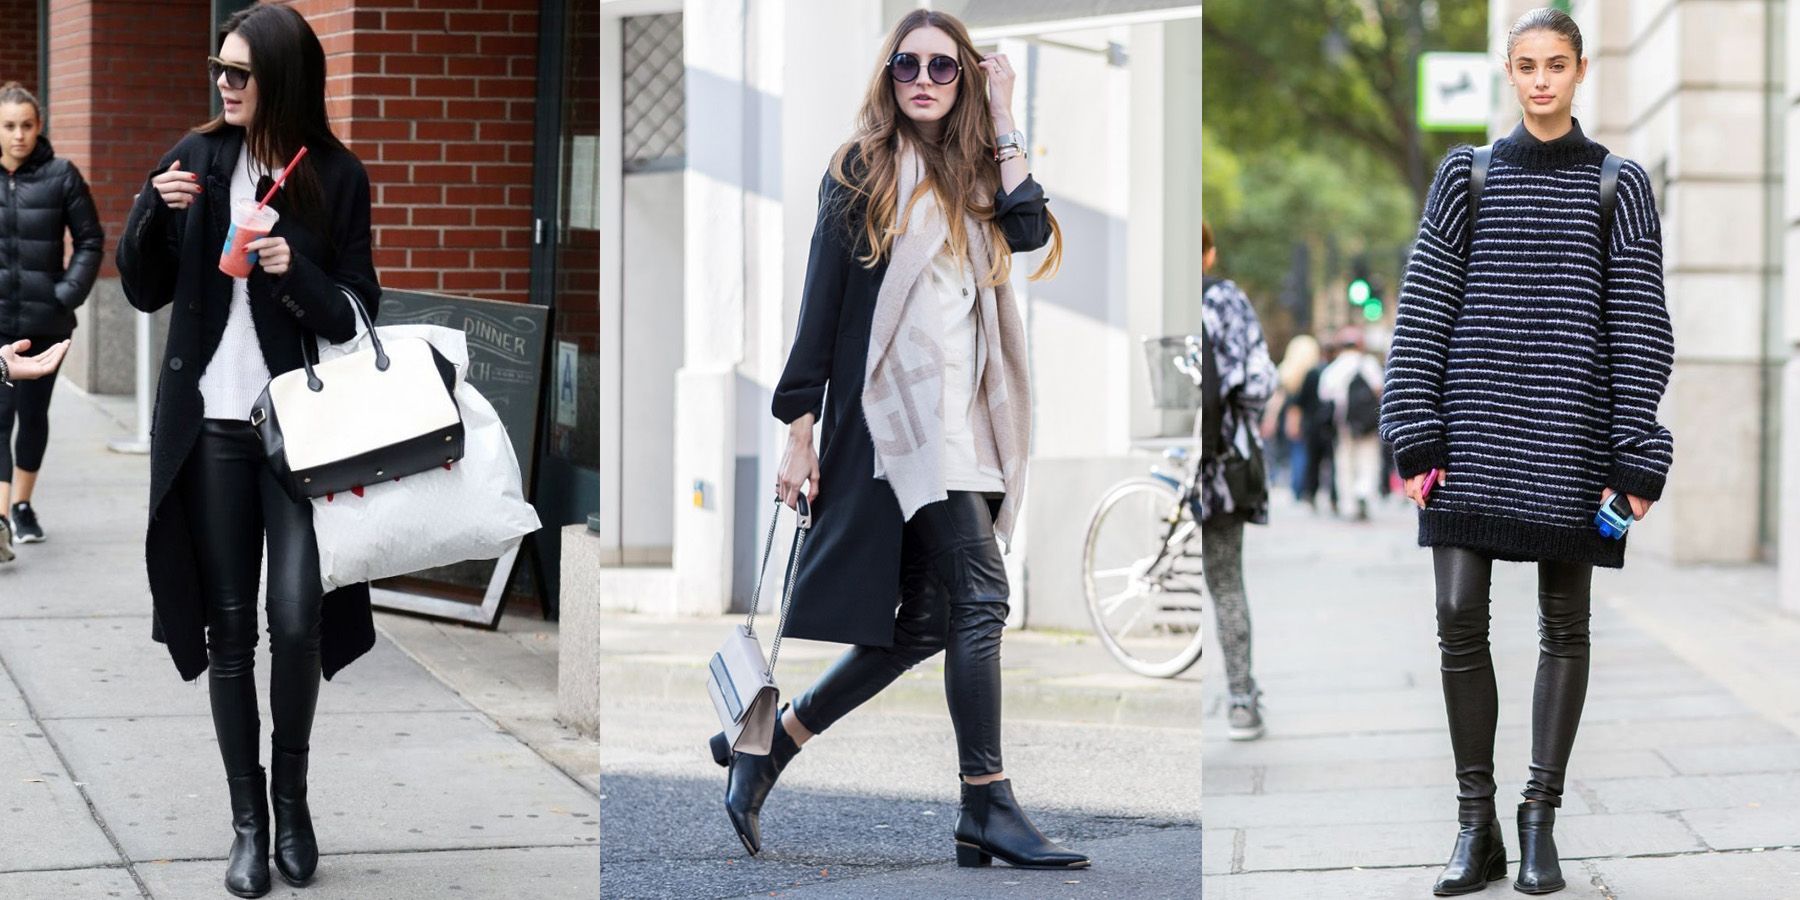 These are the 3 most suitable shoes for your leather pants